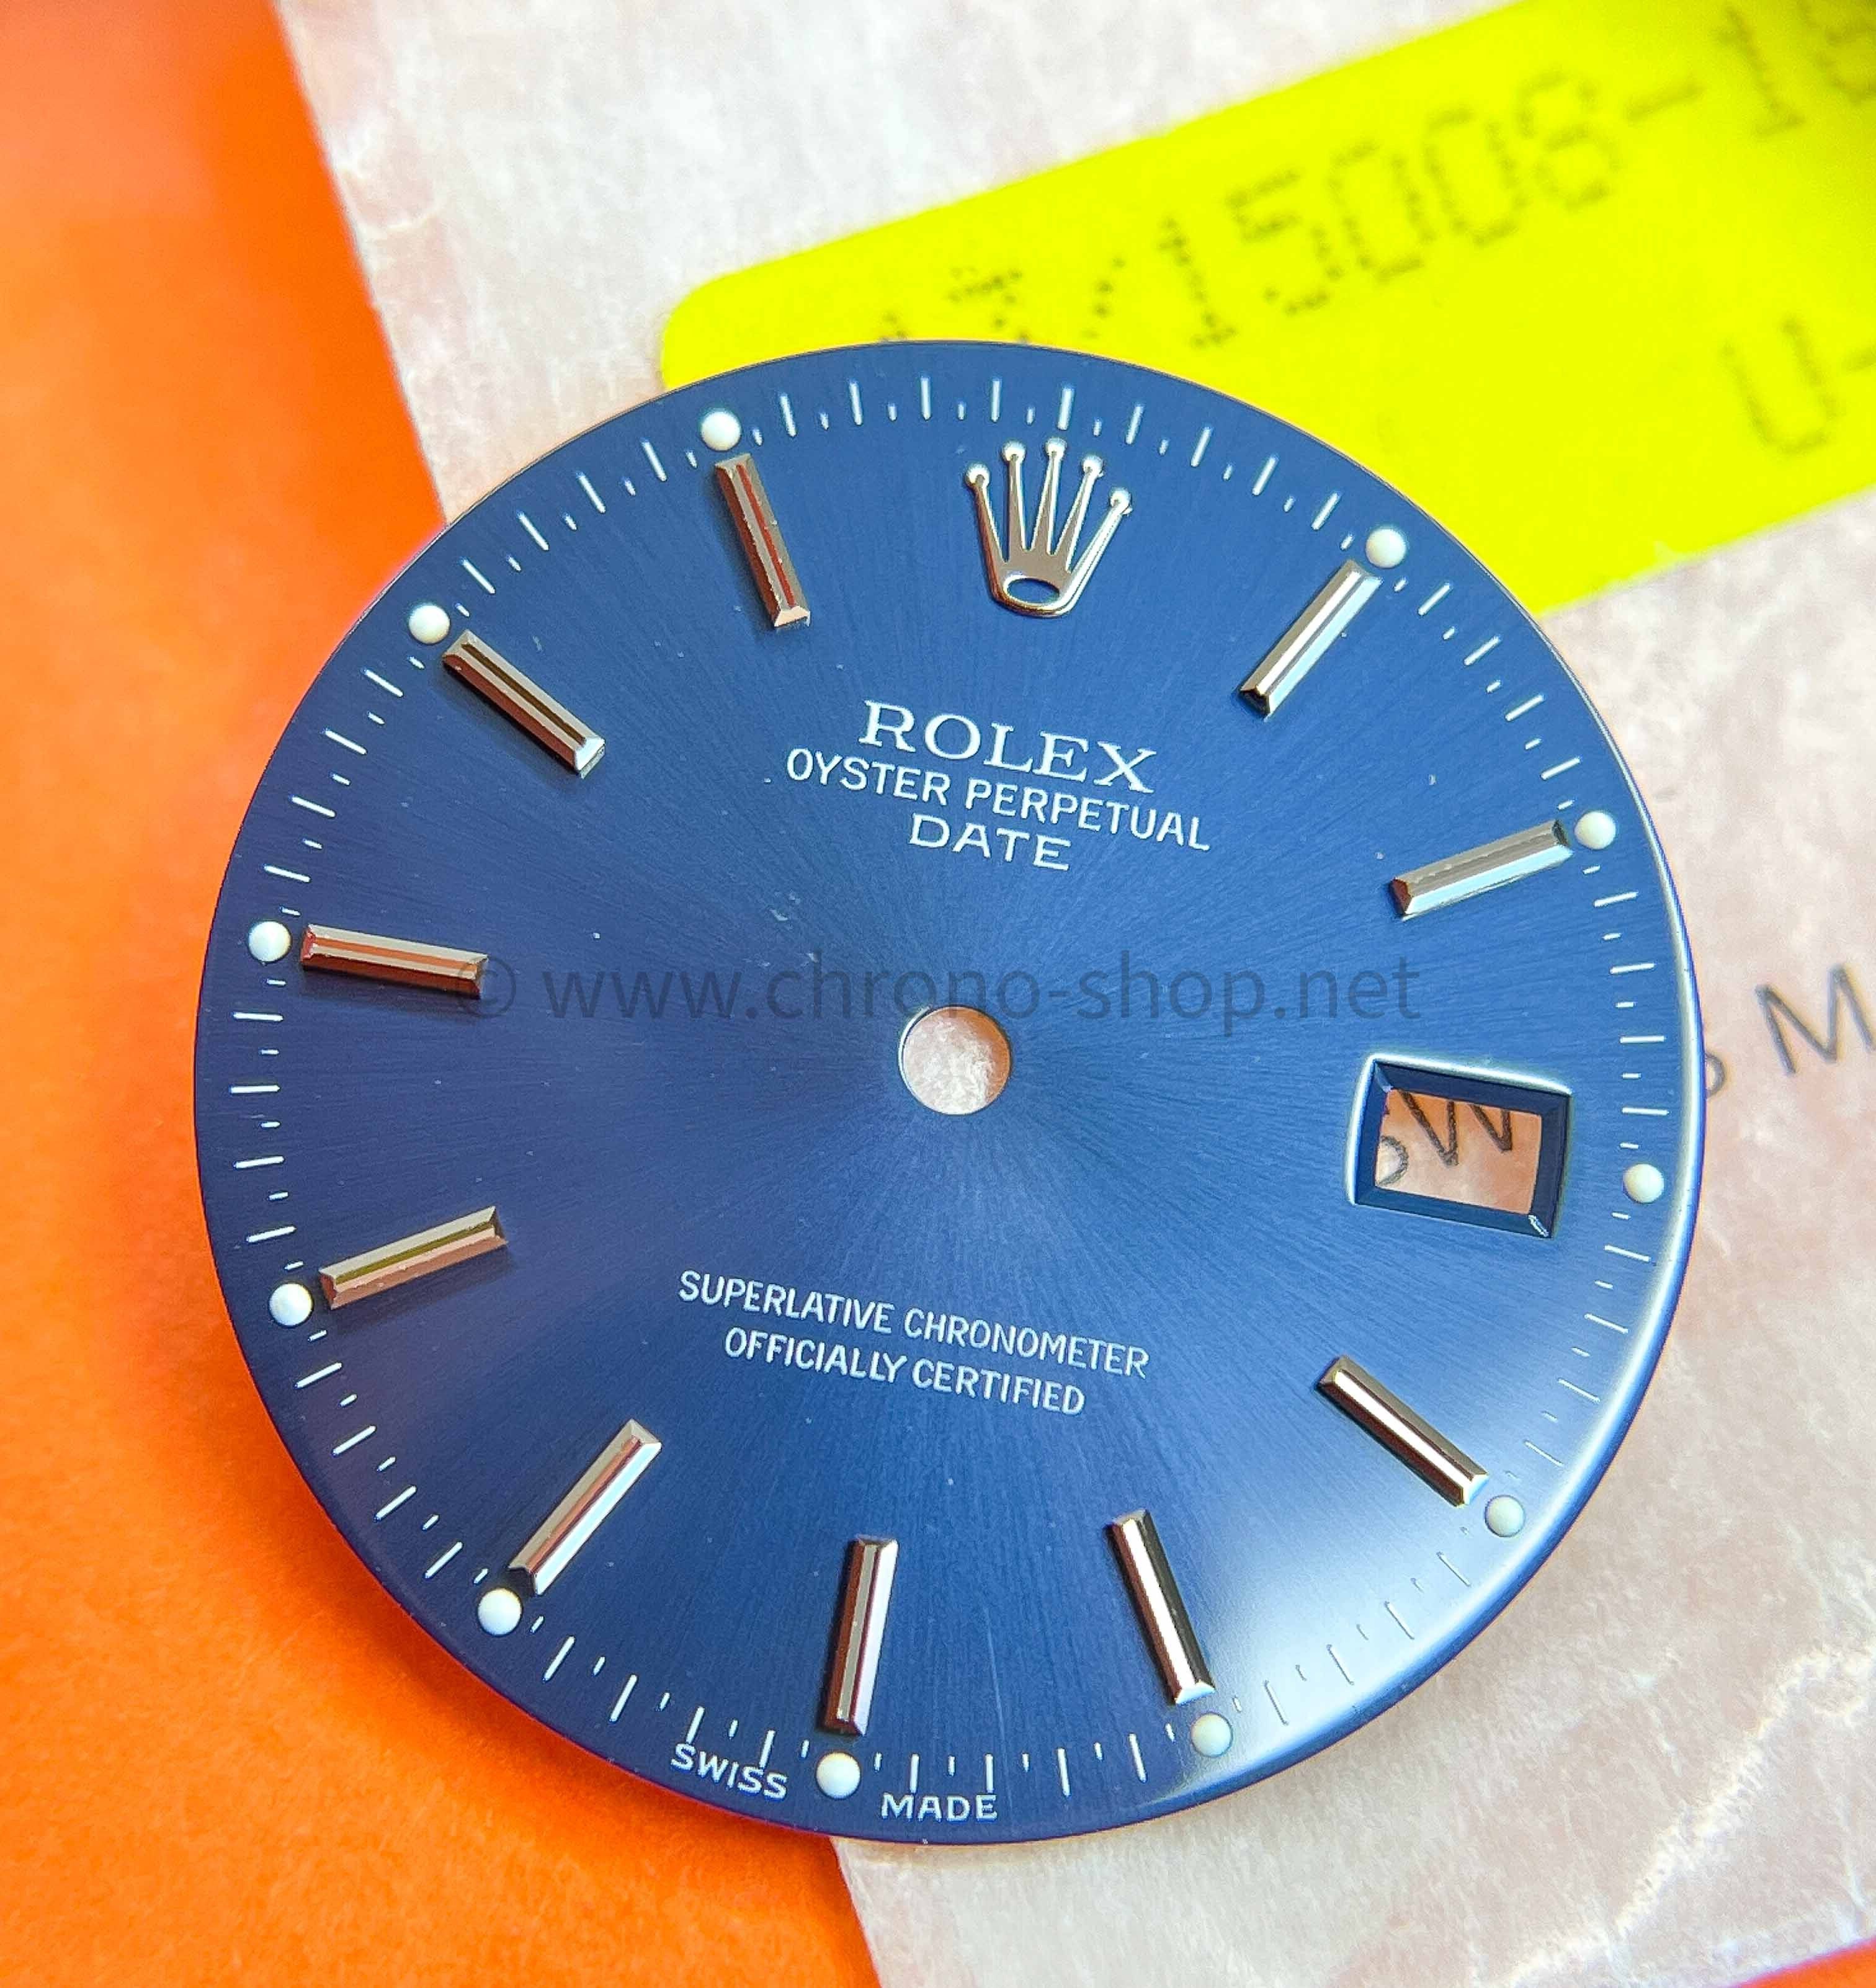 ROLEX BLUE COLOR DIAL OYSTER PERPETUAL 15000,15010,15037,15008,15053,15200 CAL 3035 3135